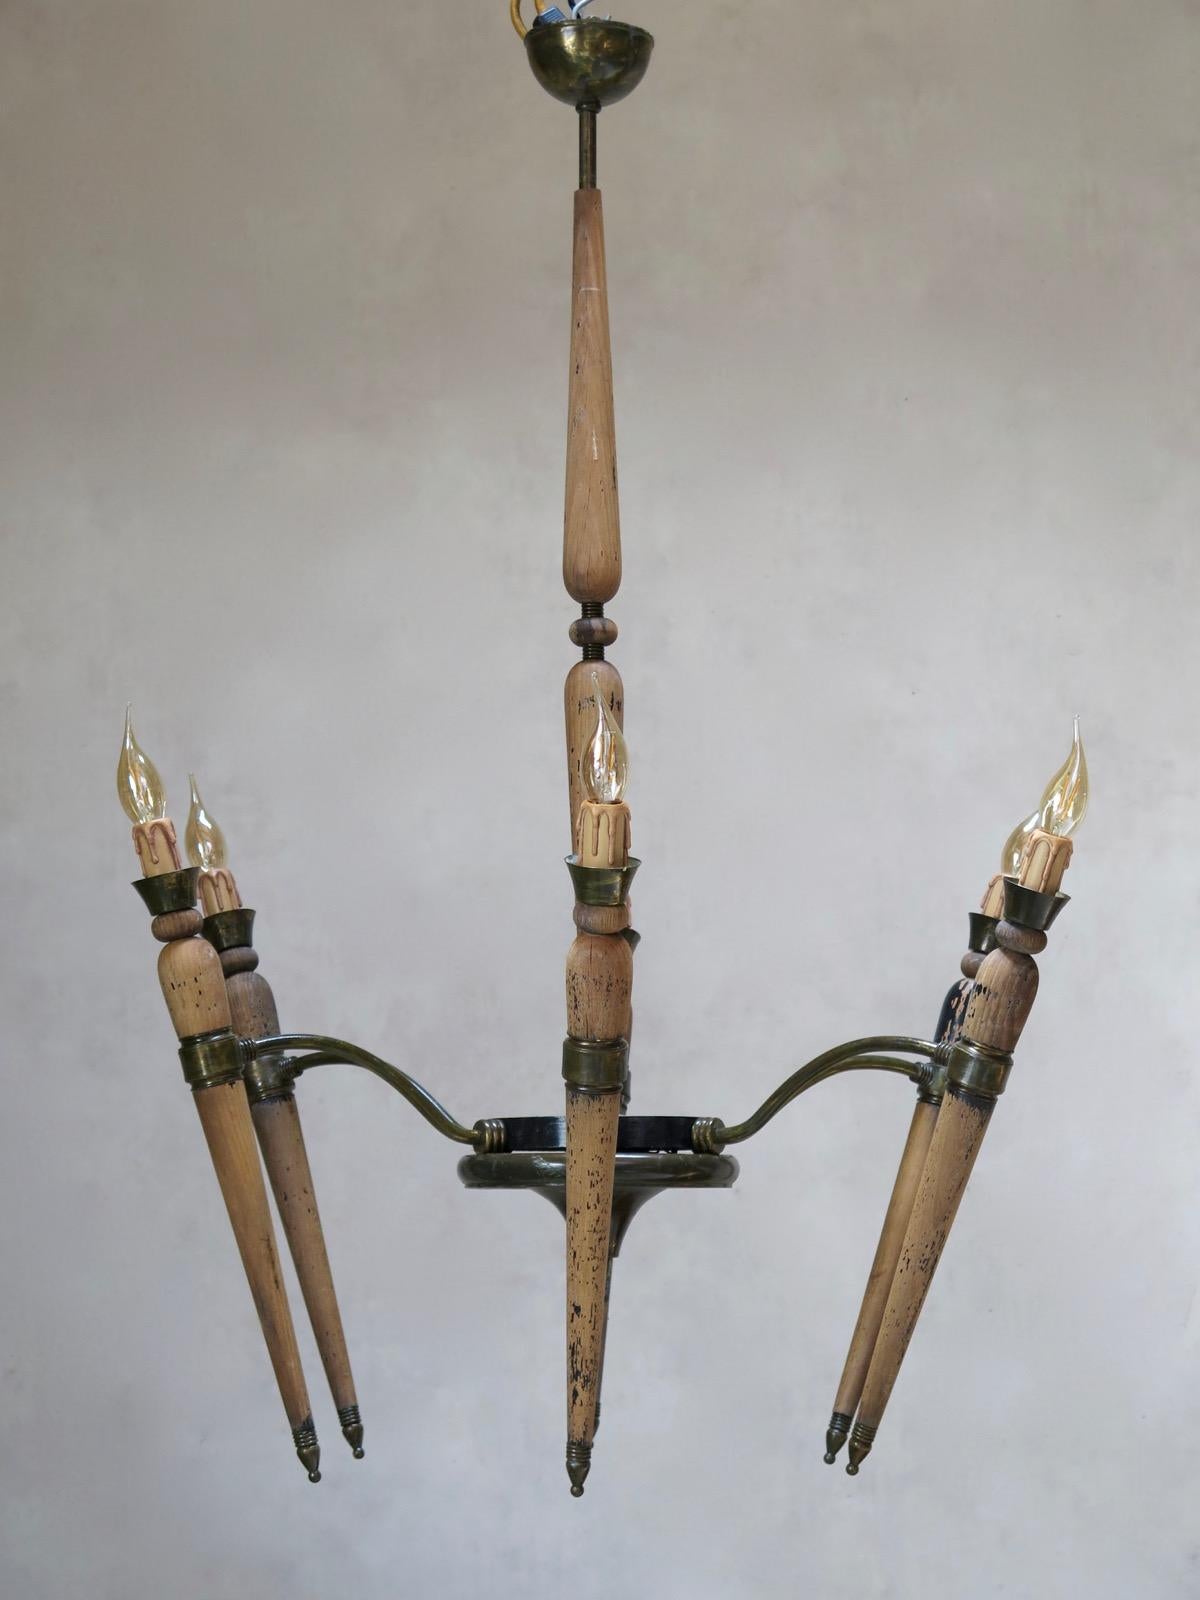 Unusual and very chic pair of large-sized French Art Deco chandeliers, with six torchere-shaped lights each. The wood originally had a glossy black finish, but the paint has largely worn off.